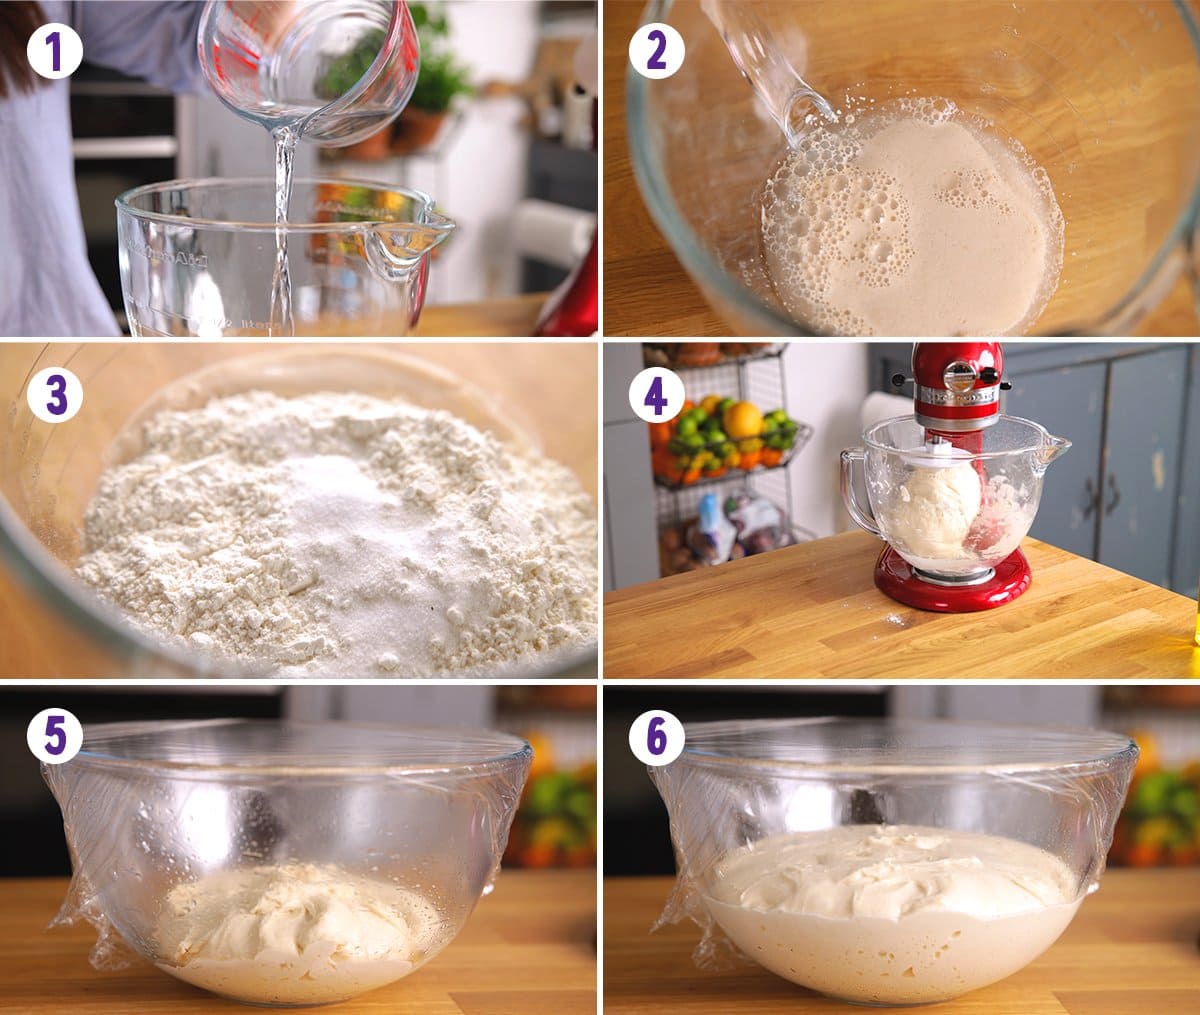 6 image collage showing initial steps for making Artisan bread at home